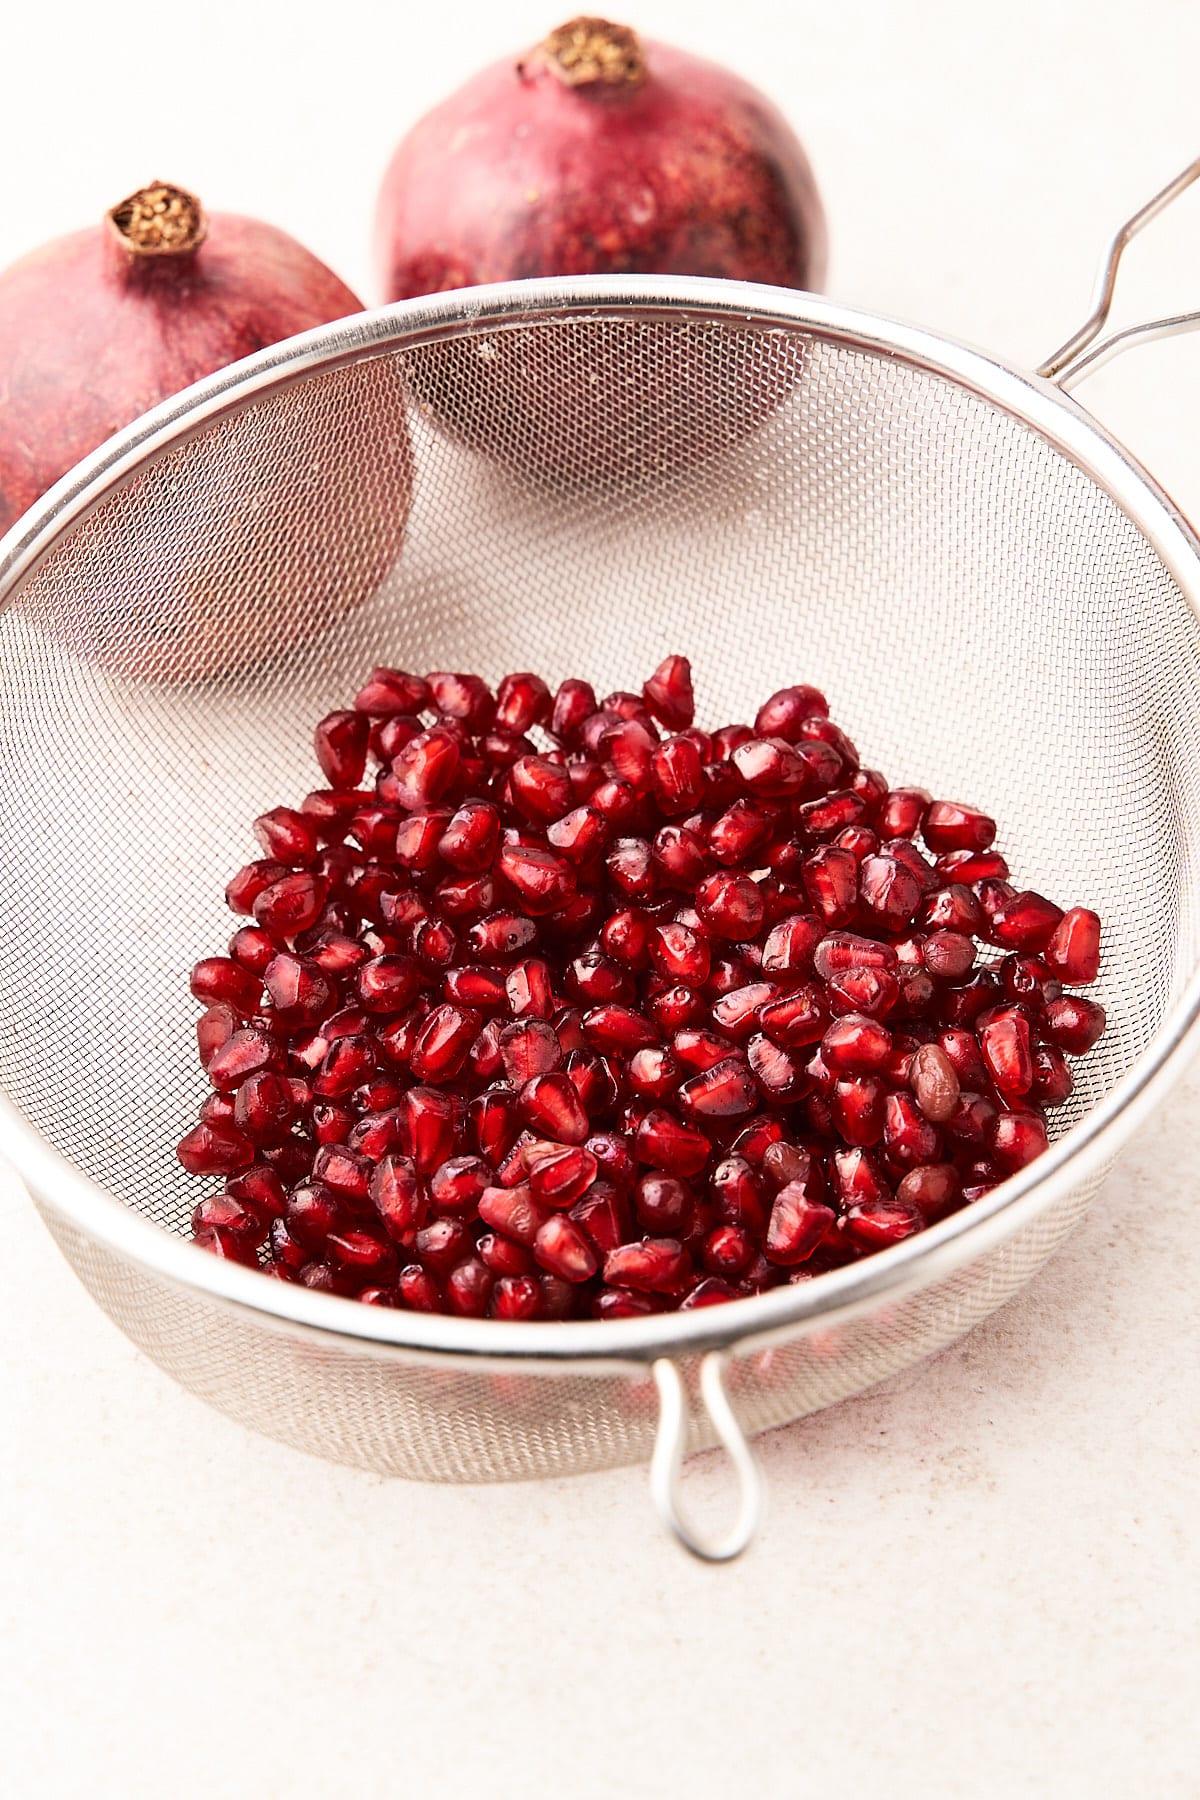 Pomegranate arils in a strainer.